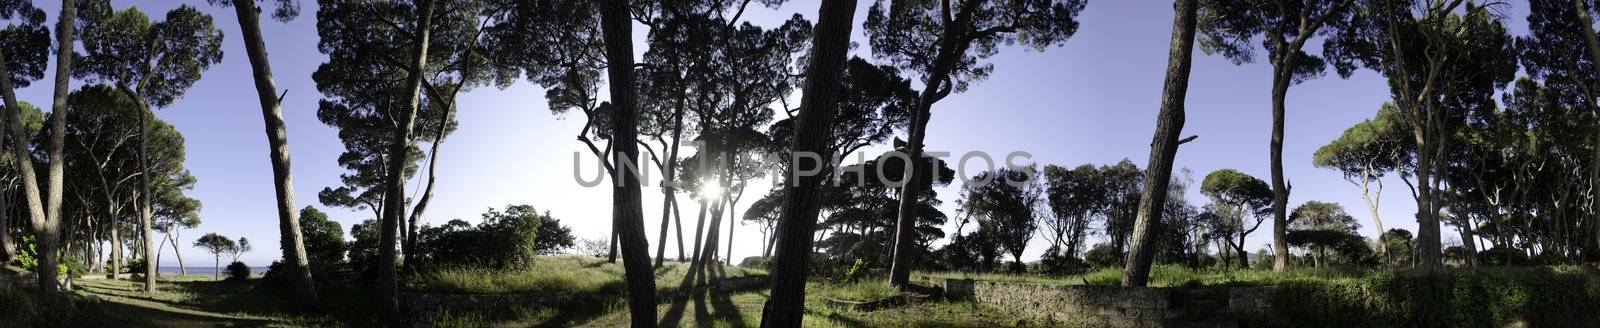 Pines in a Tuscan Pinewood near Follonica, Italy